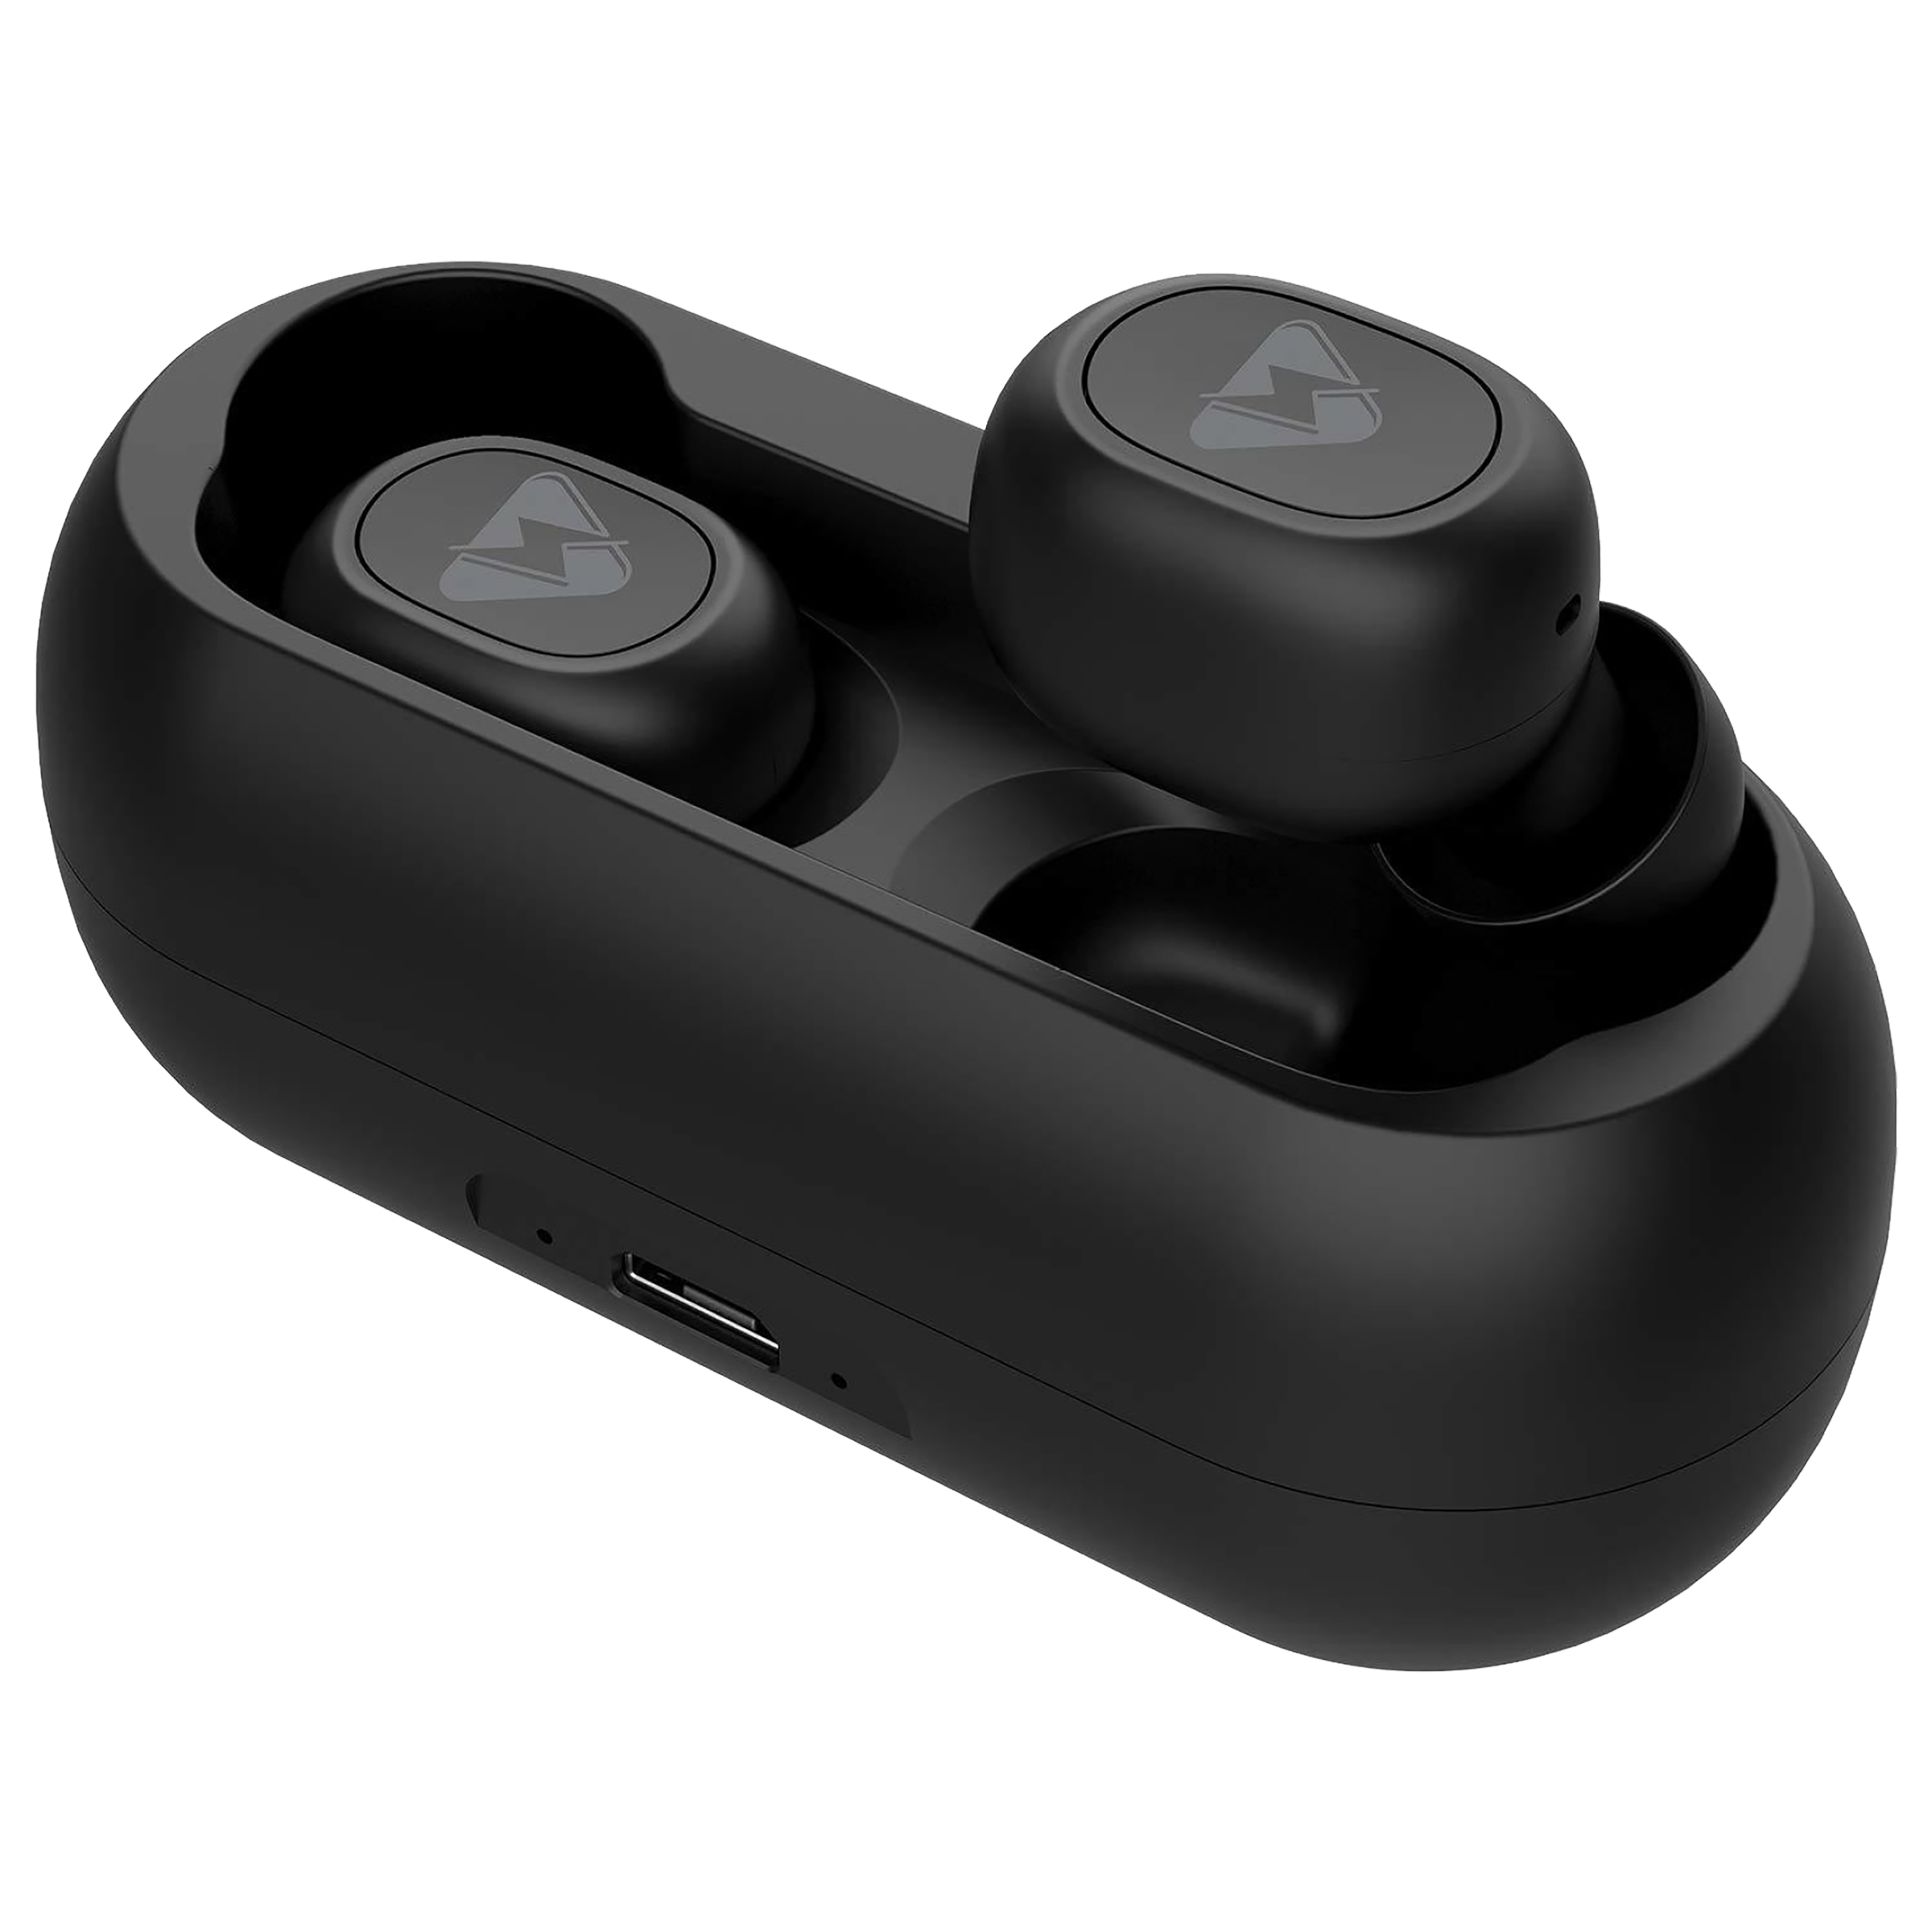 Modget Power Shots MOG-TWS In-Ear Active Noise Cancellation Truly Wireless Earbuds with Mic (Bluetooth 5.0, IPX4 Splash & Sweat Resistant, Black)_1